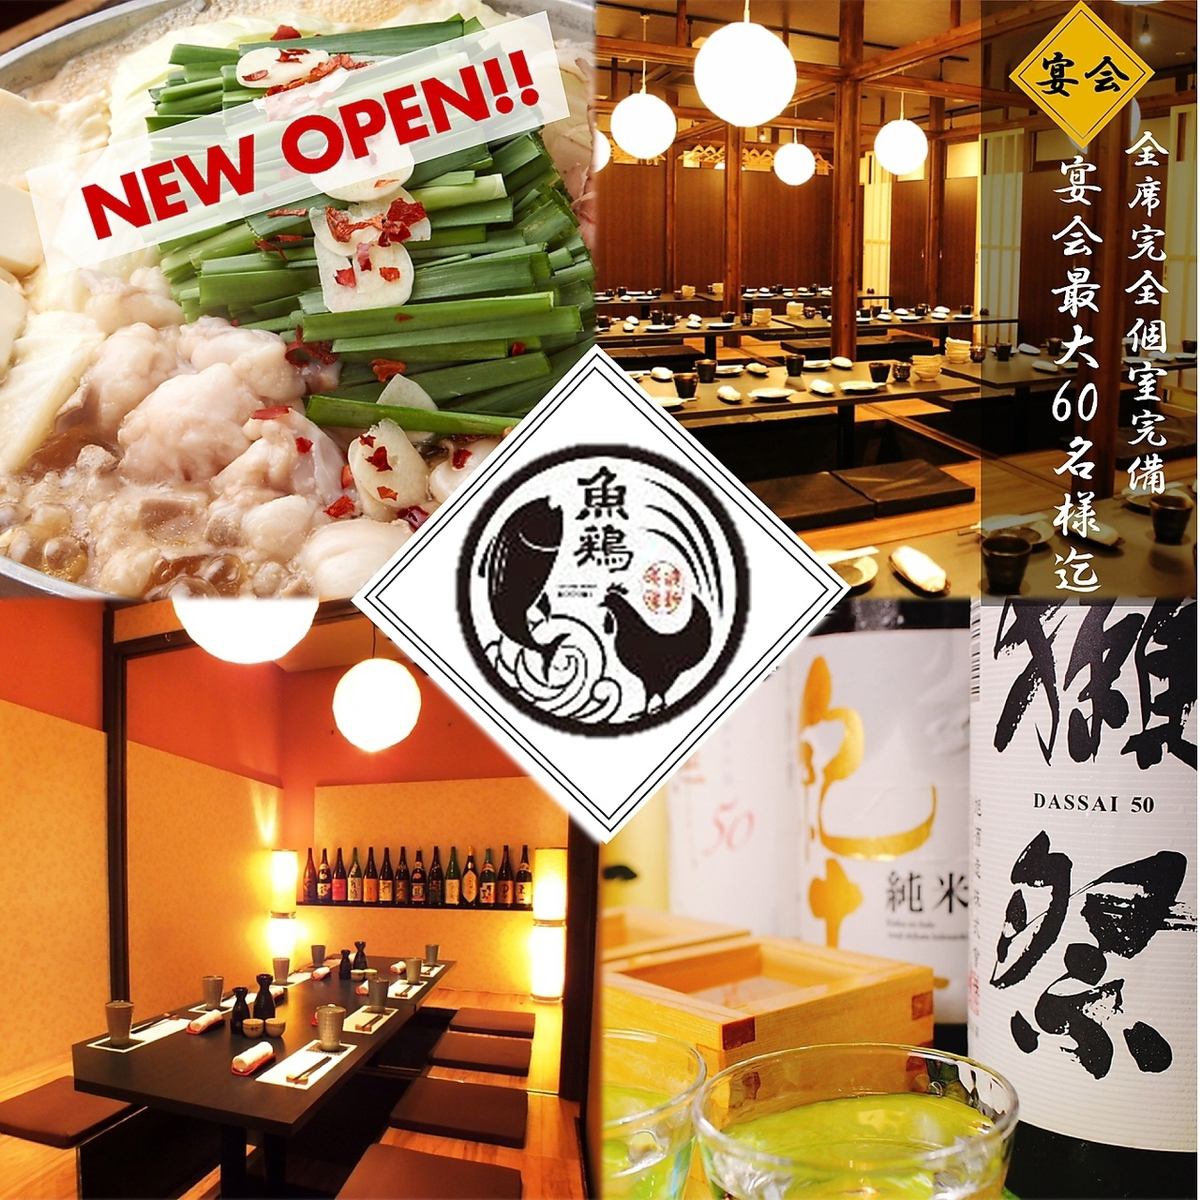 ◆3-hour all-you-can-drink course available! Uo Chicken, featuring Japanese sake and seafood!